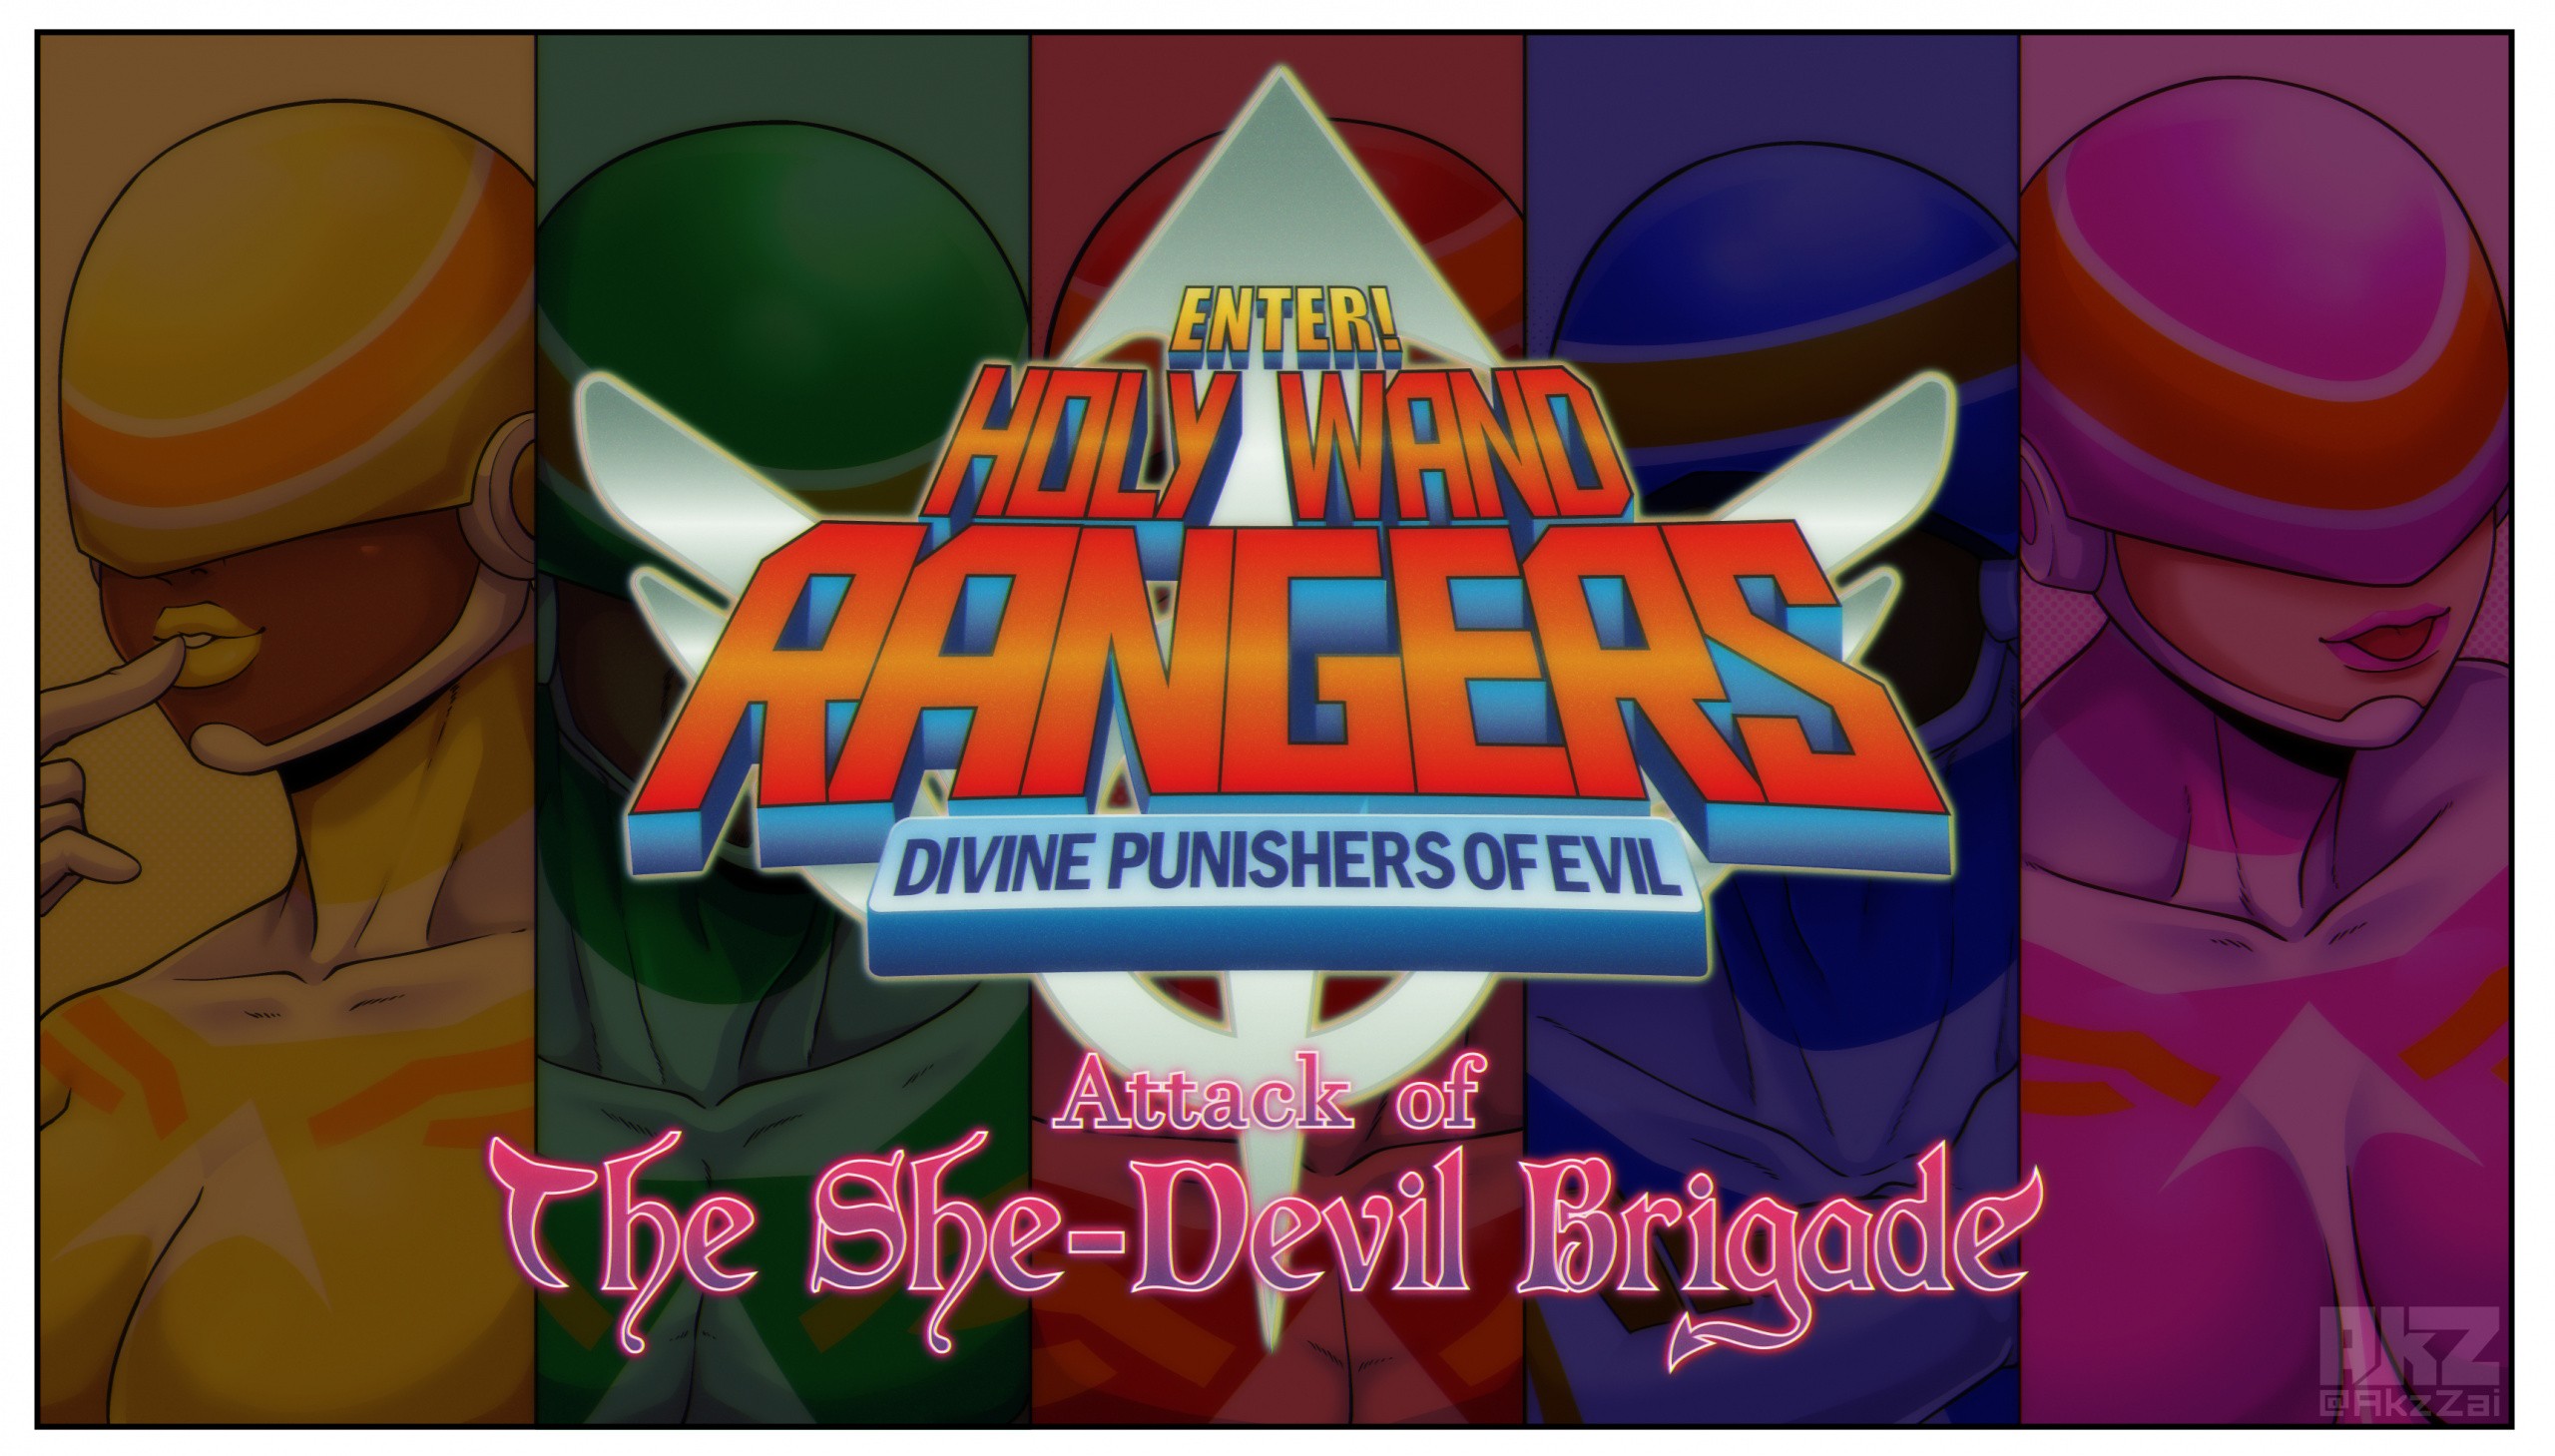 Enter! Holy Wand Rangers - Attack of The She-Devil Brigade porn comic picture 1